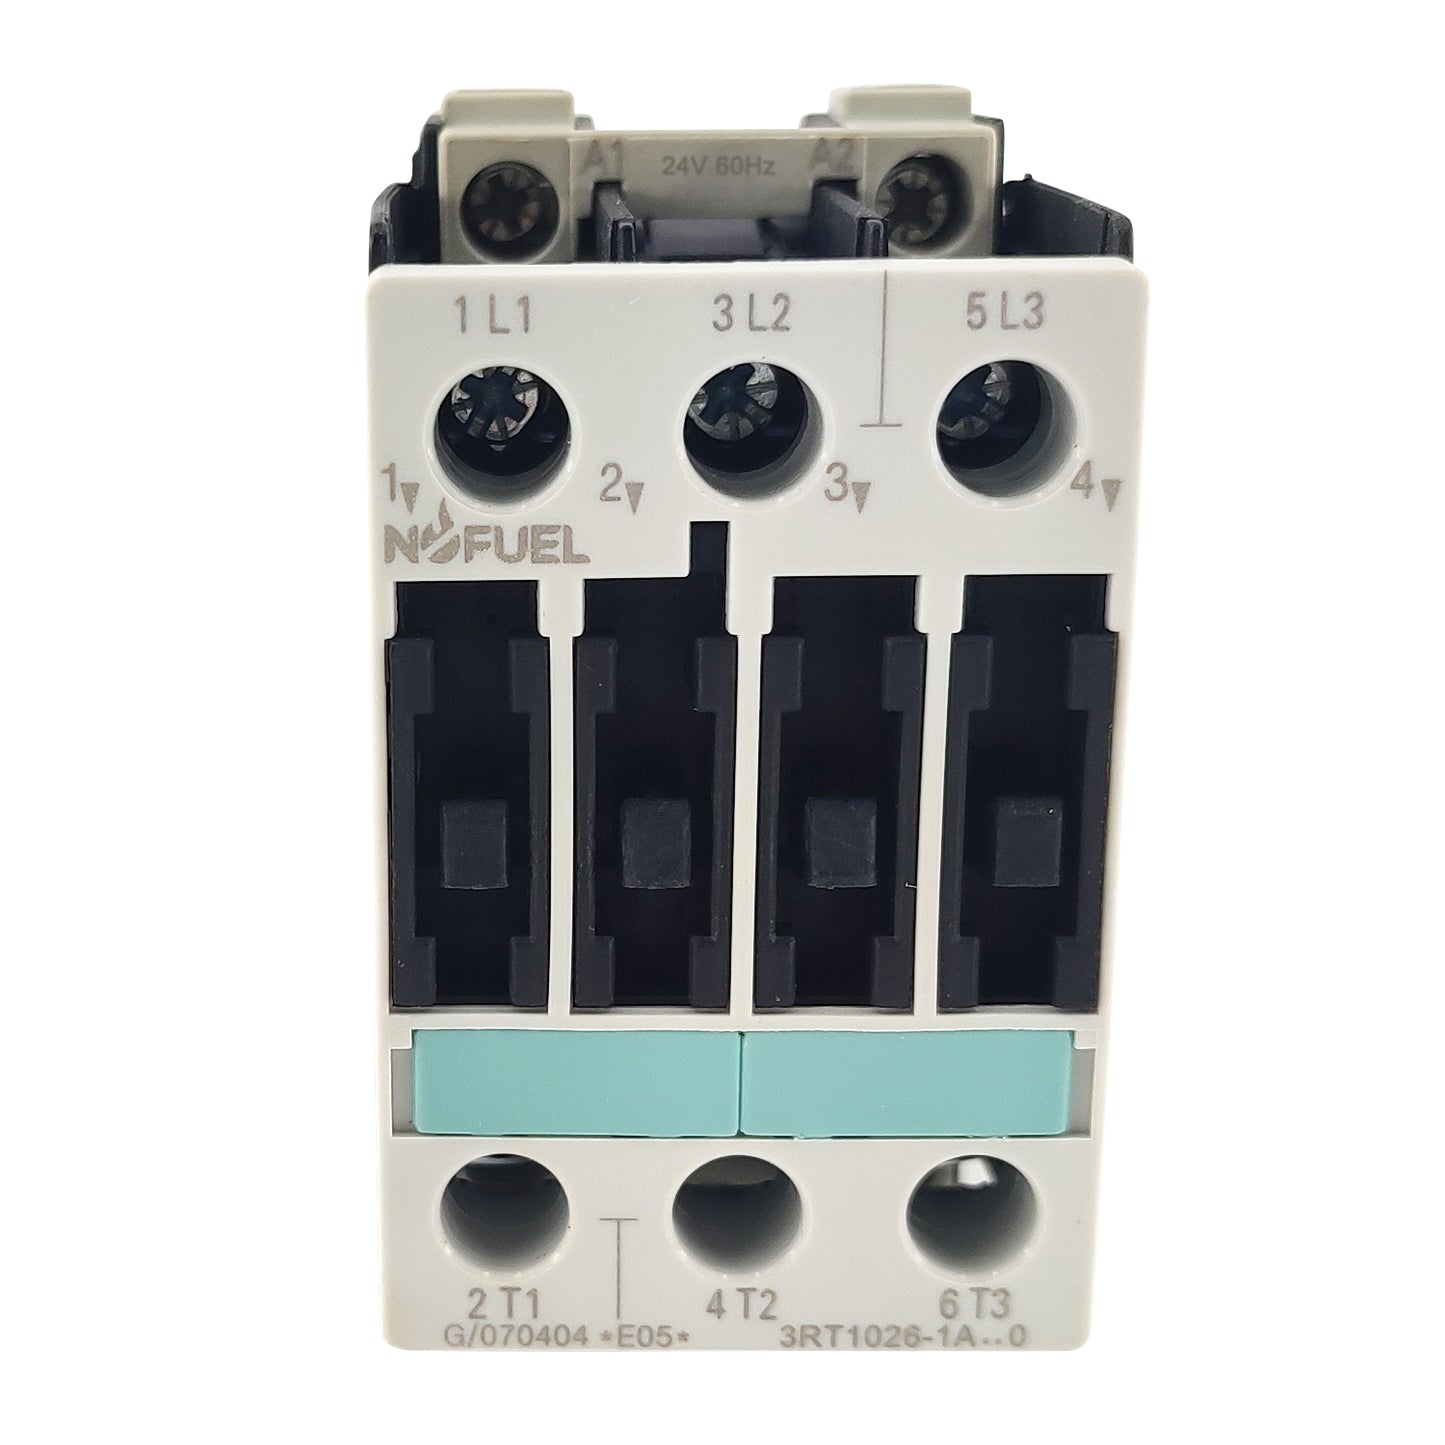 3RT1026-1AB00 AC Contactor 24V Fit for Siemens 3RT1026